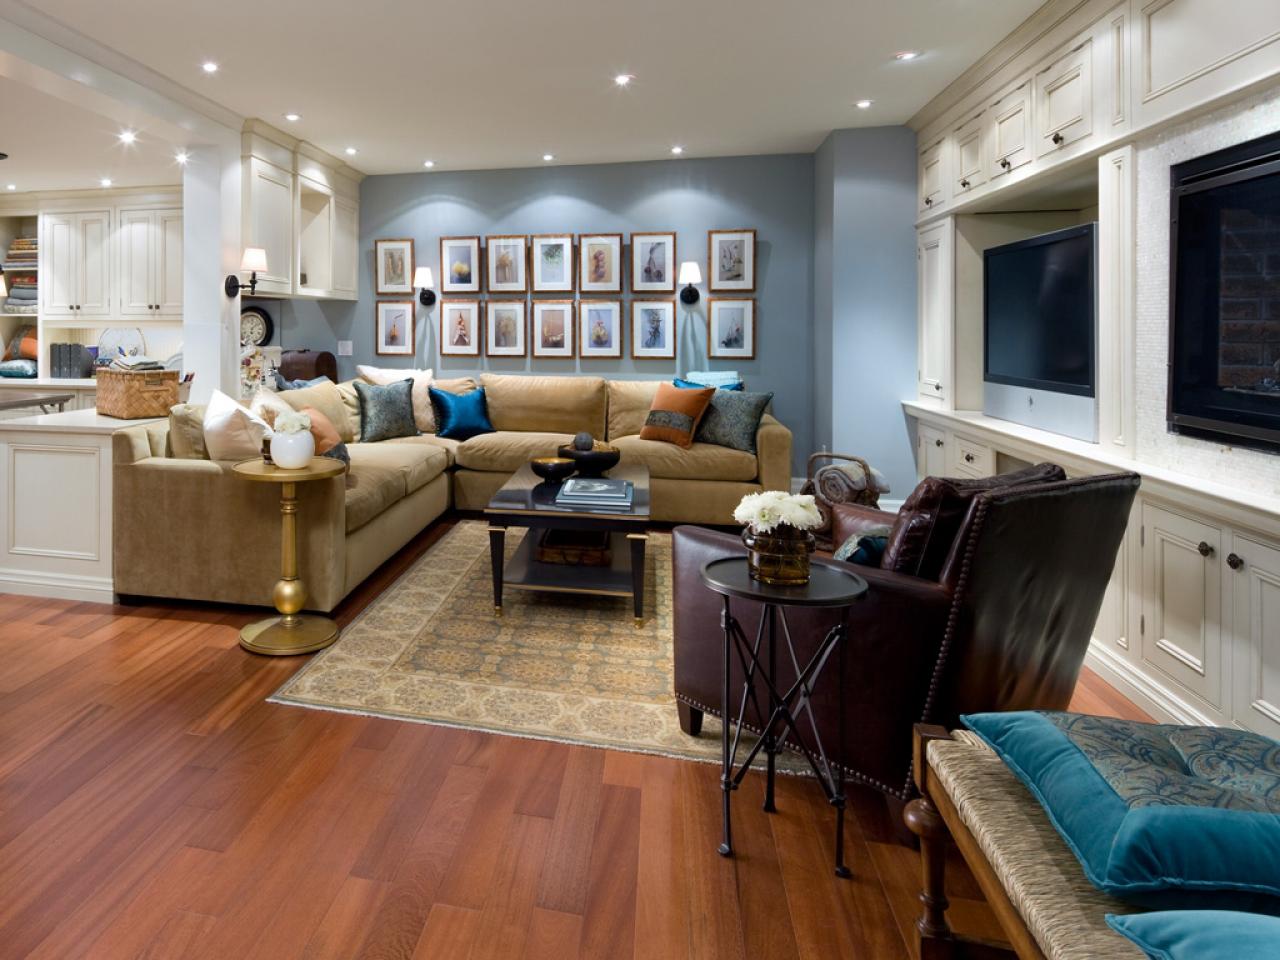 Wood Flooring In The Basement, How To Install Engineered Hardwood In Basement